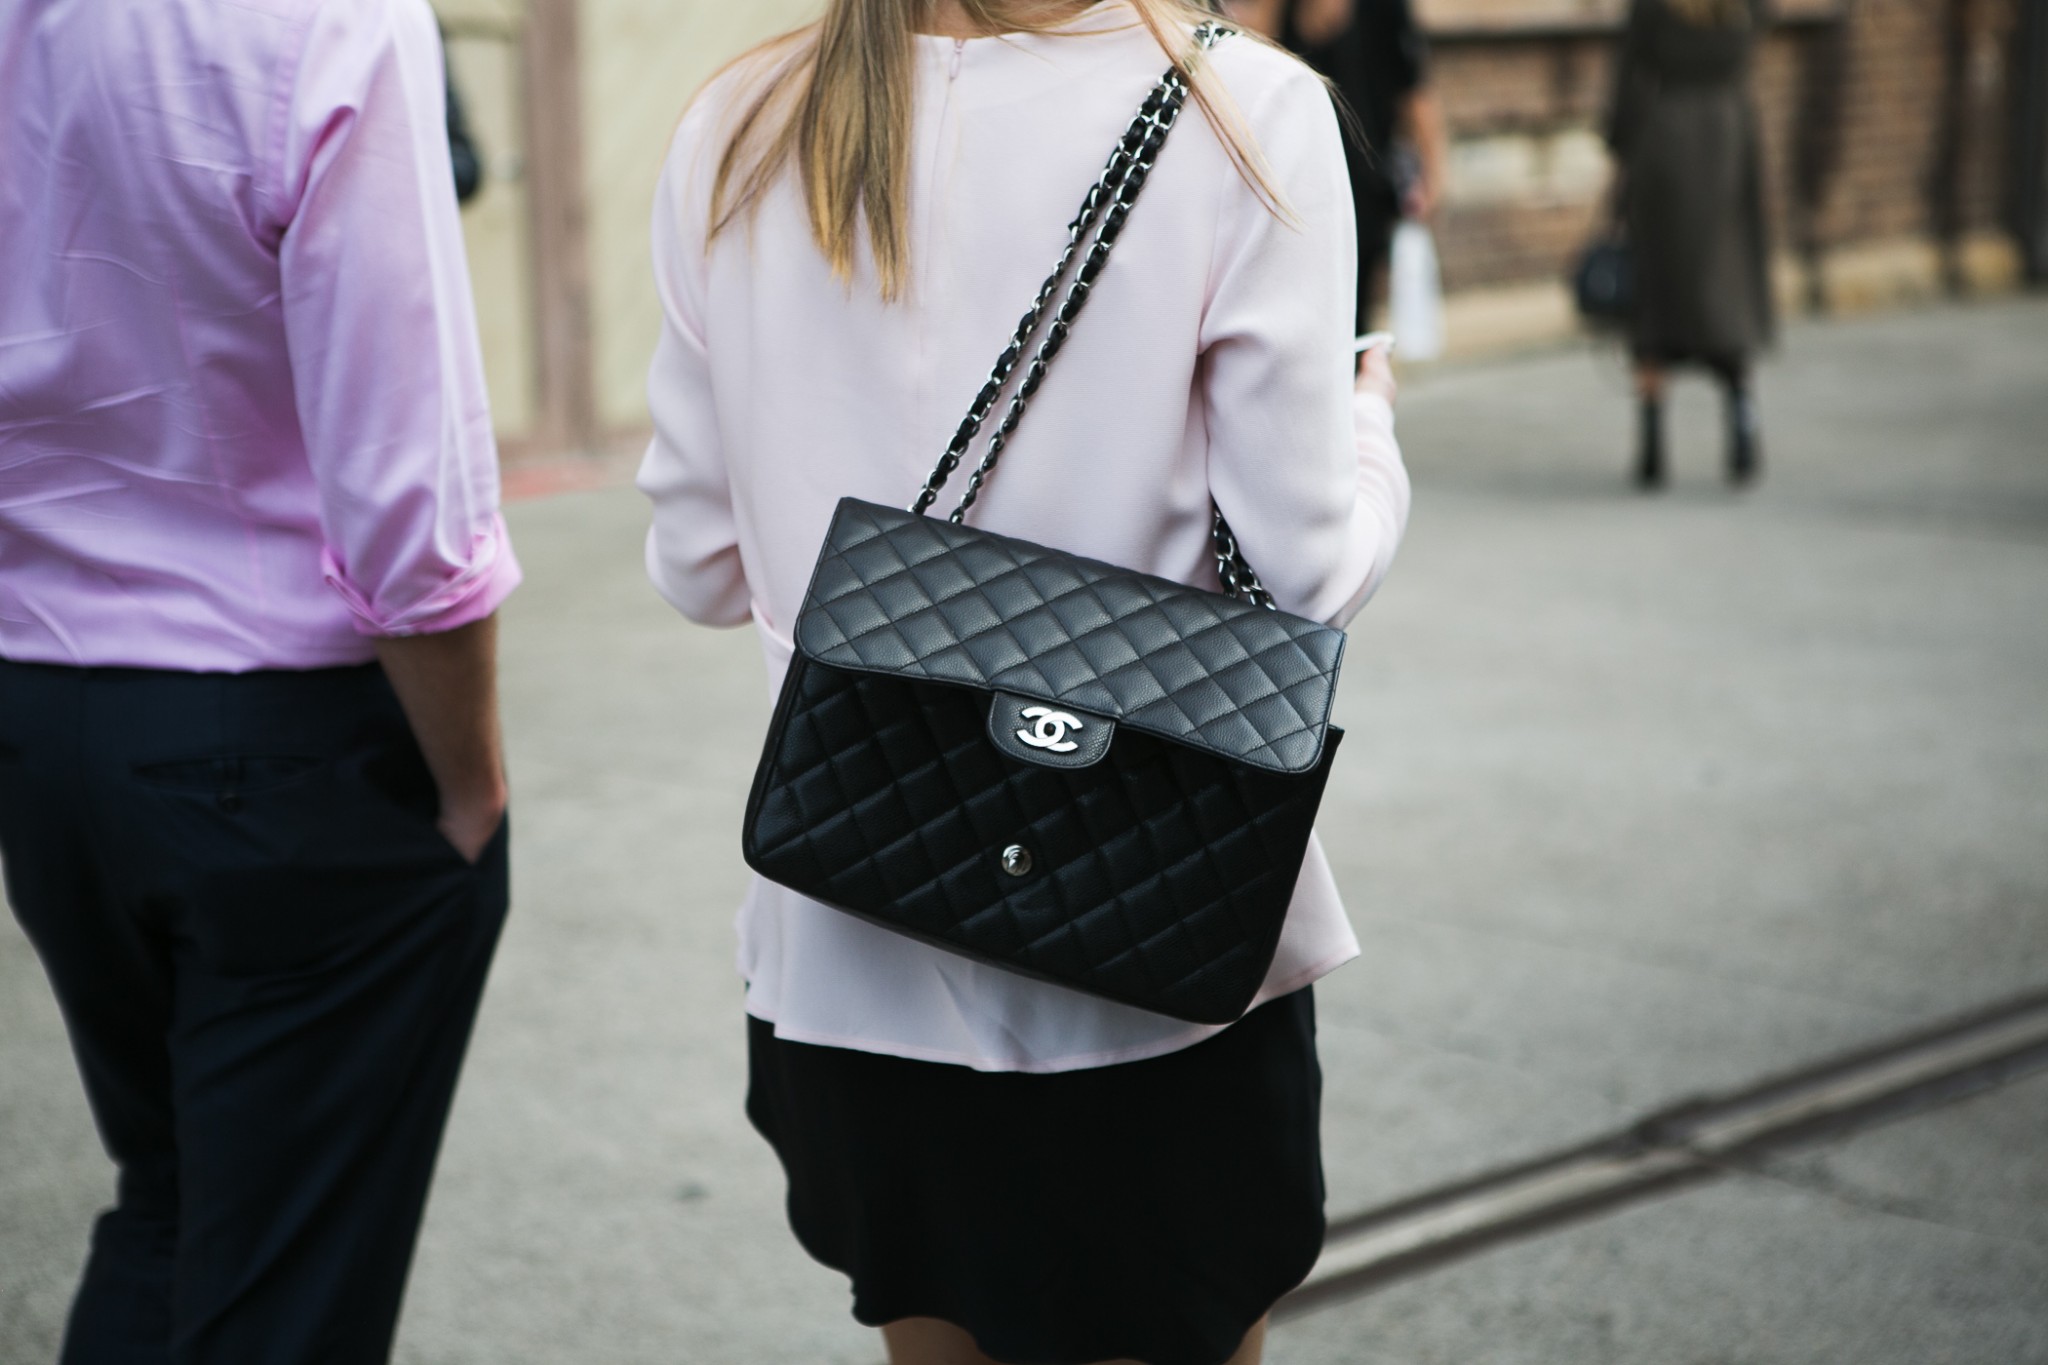 Chanel Flap Bags Honest Review Updated  I Make Leather Handbags